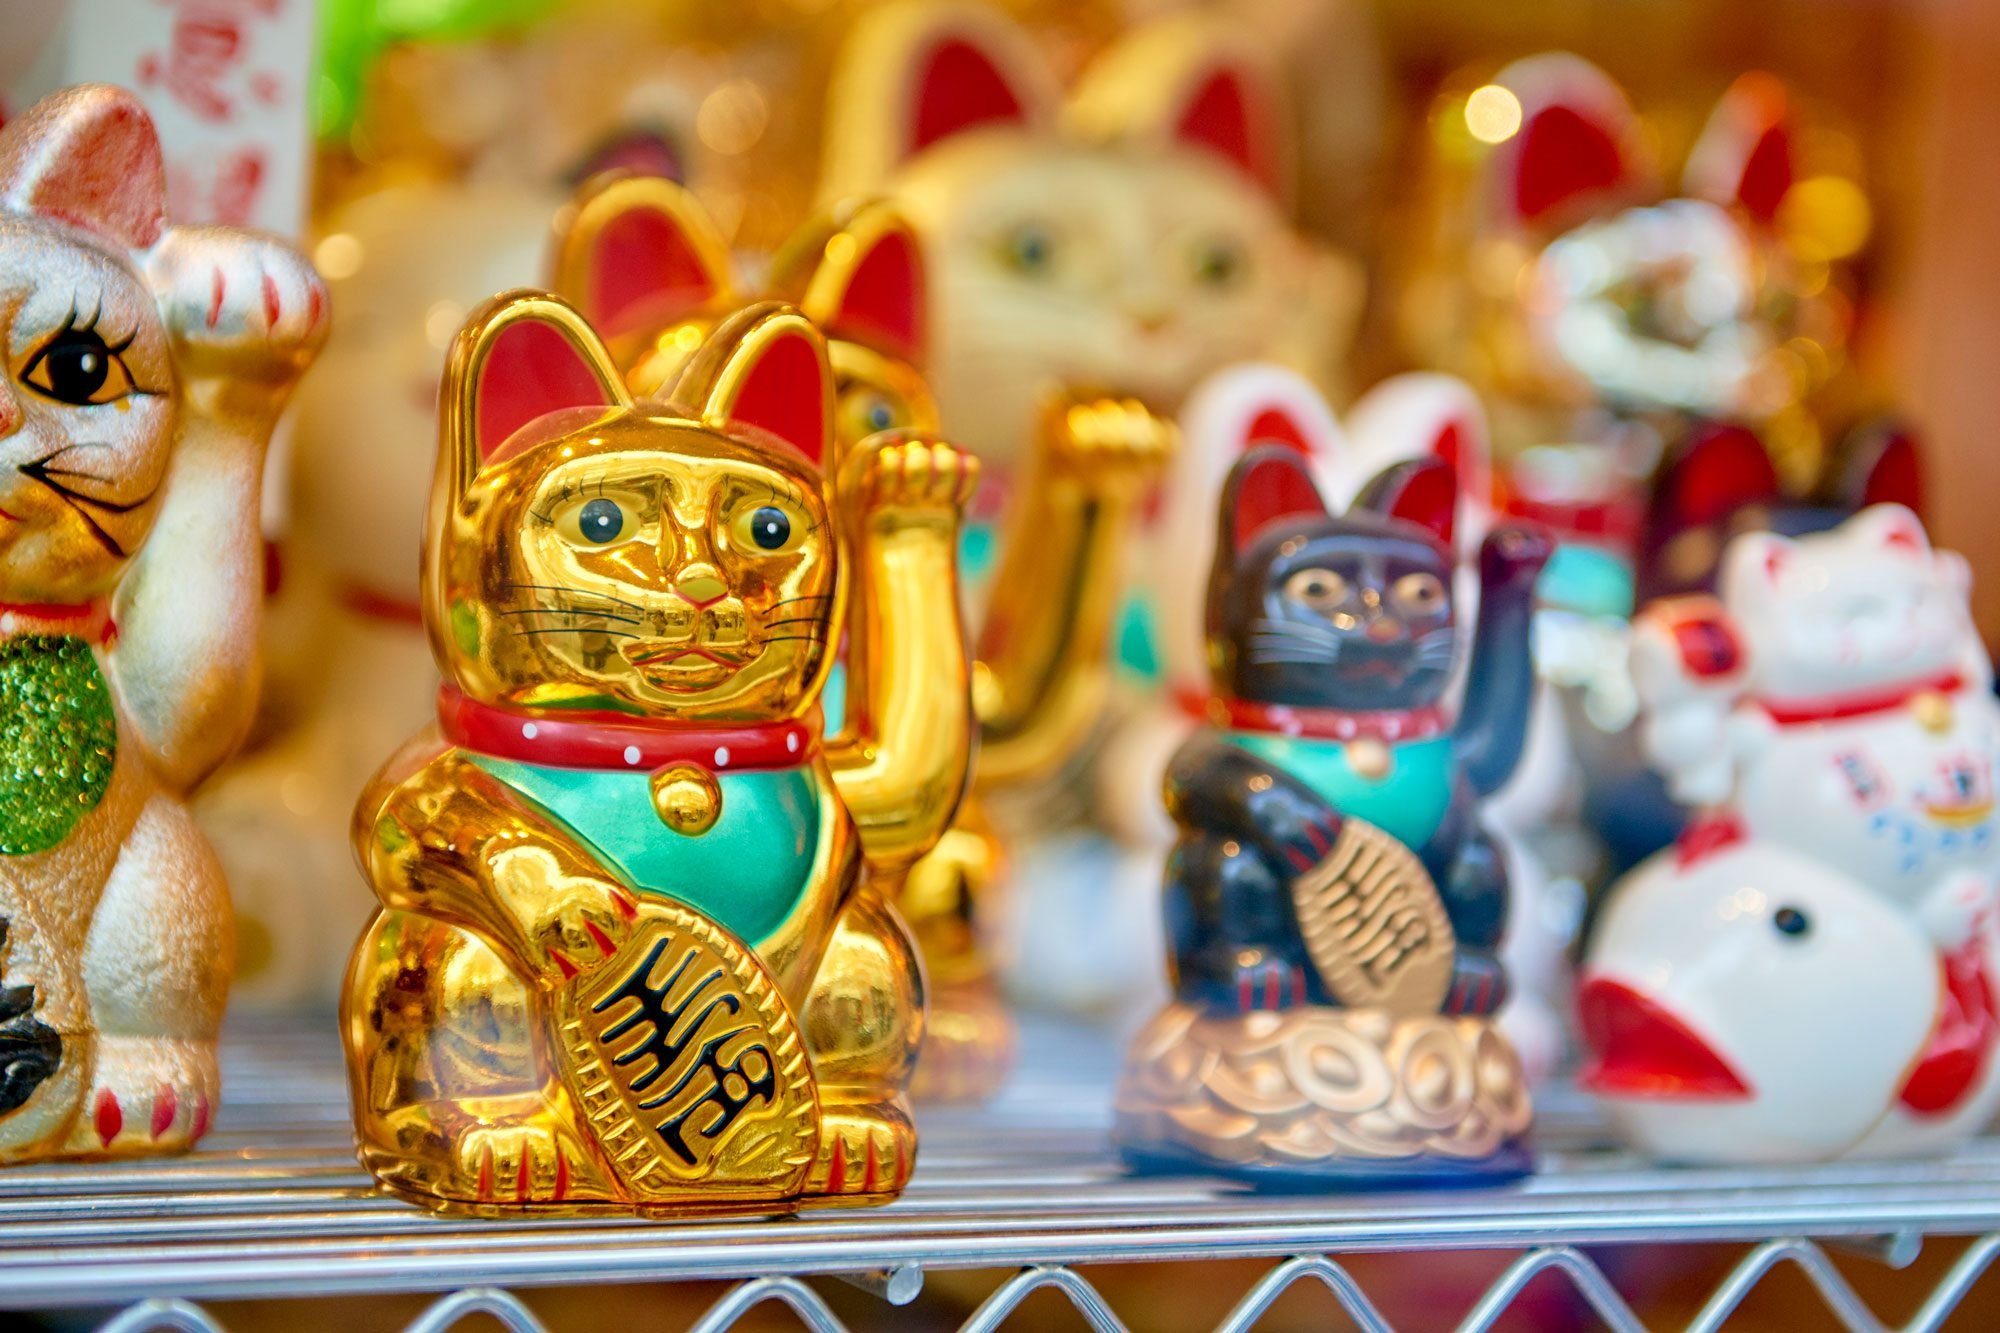 15 Good-Luck Charms from Around the World for a Boost of Good Fortune